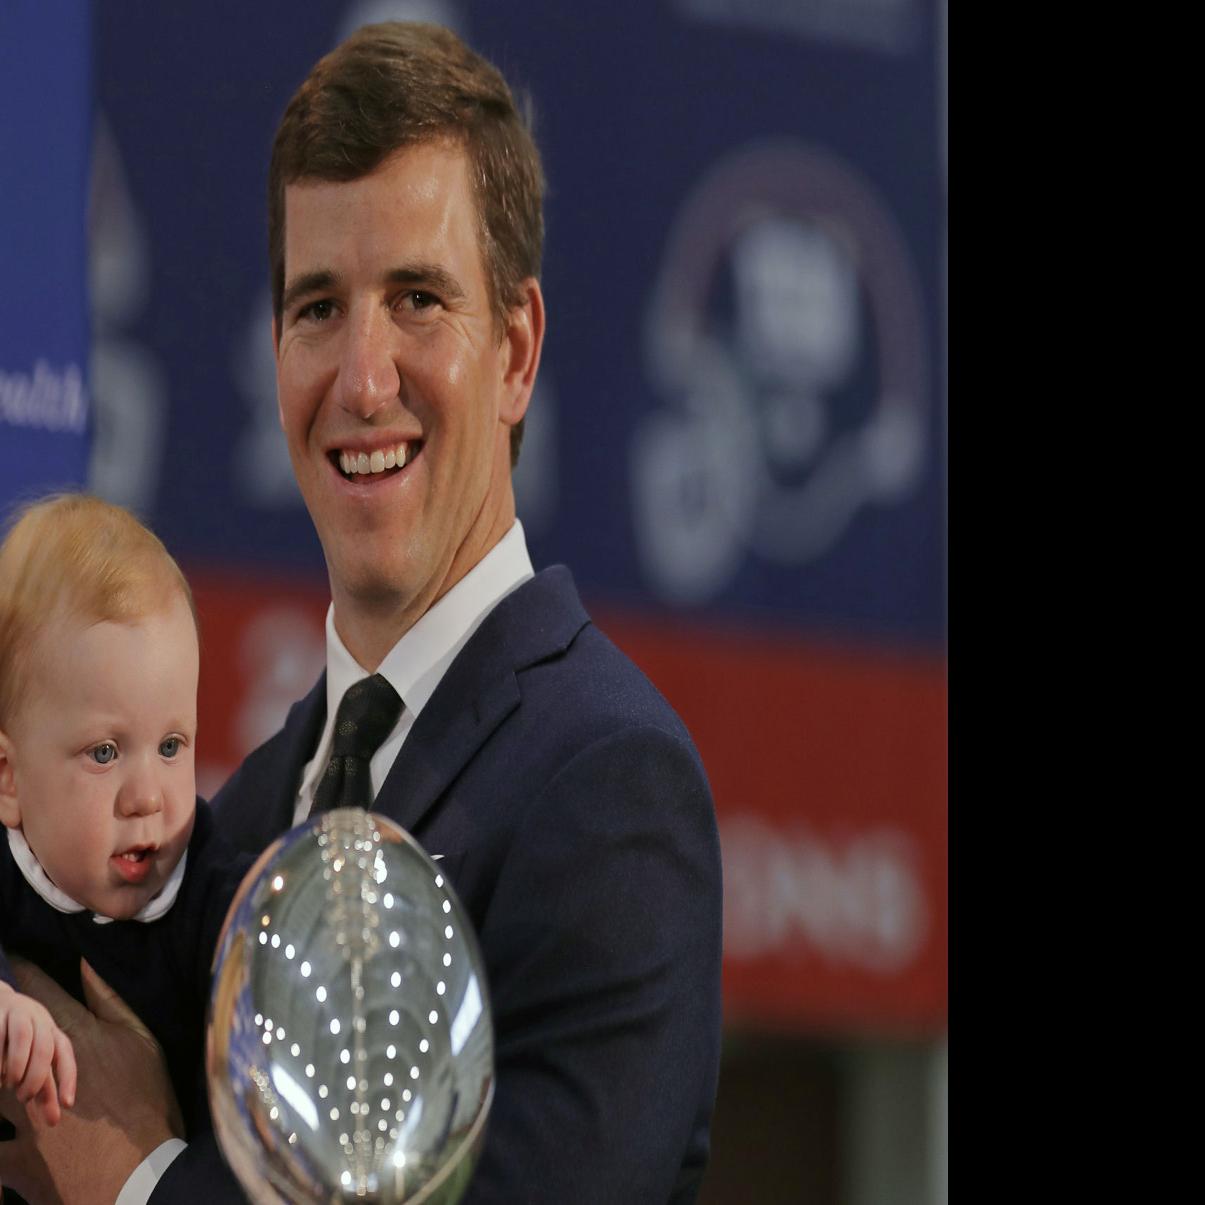 Eli Manning to retire from NFL